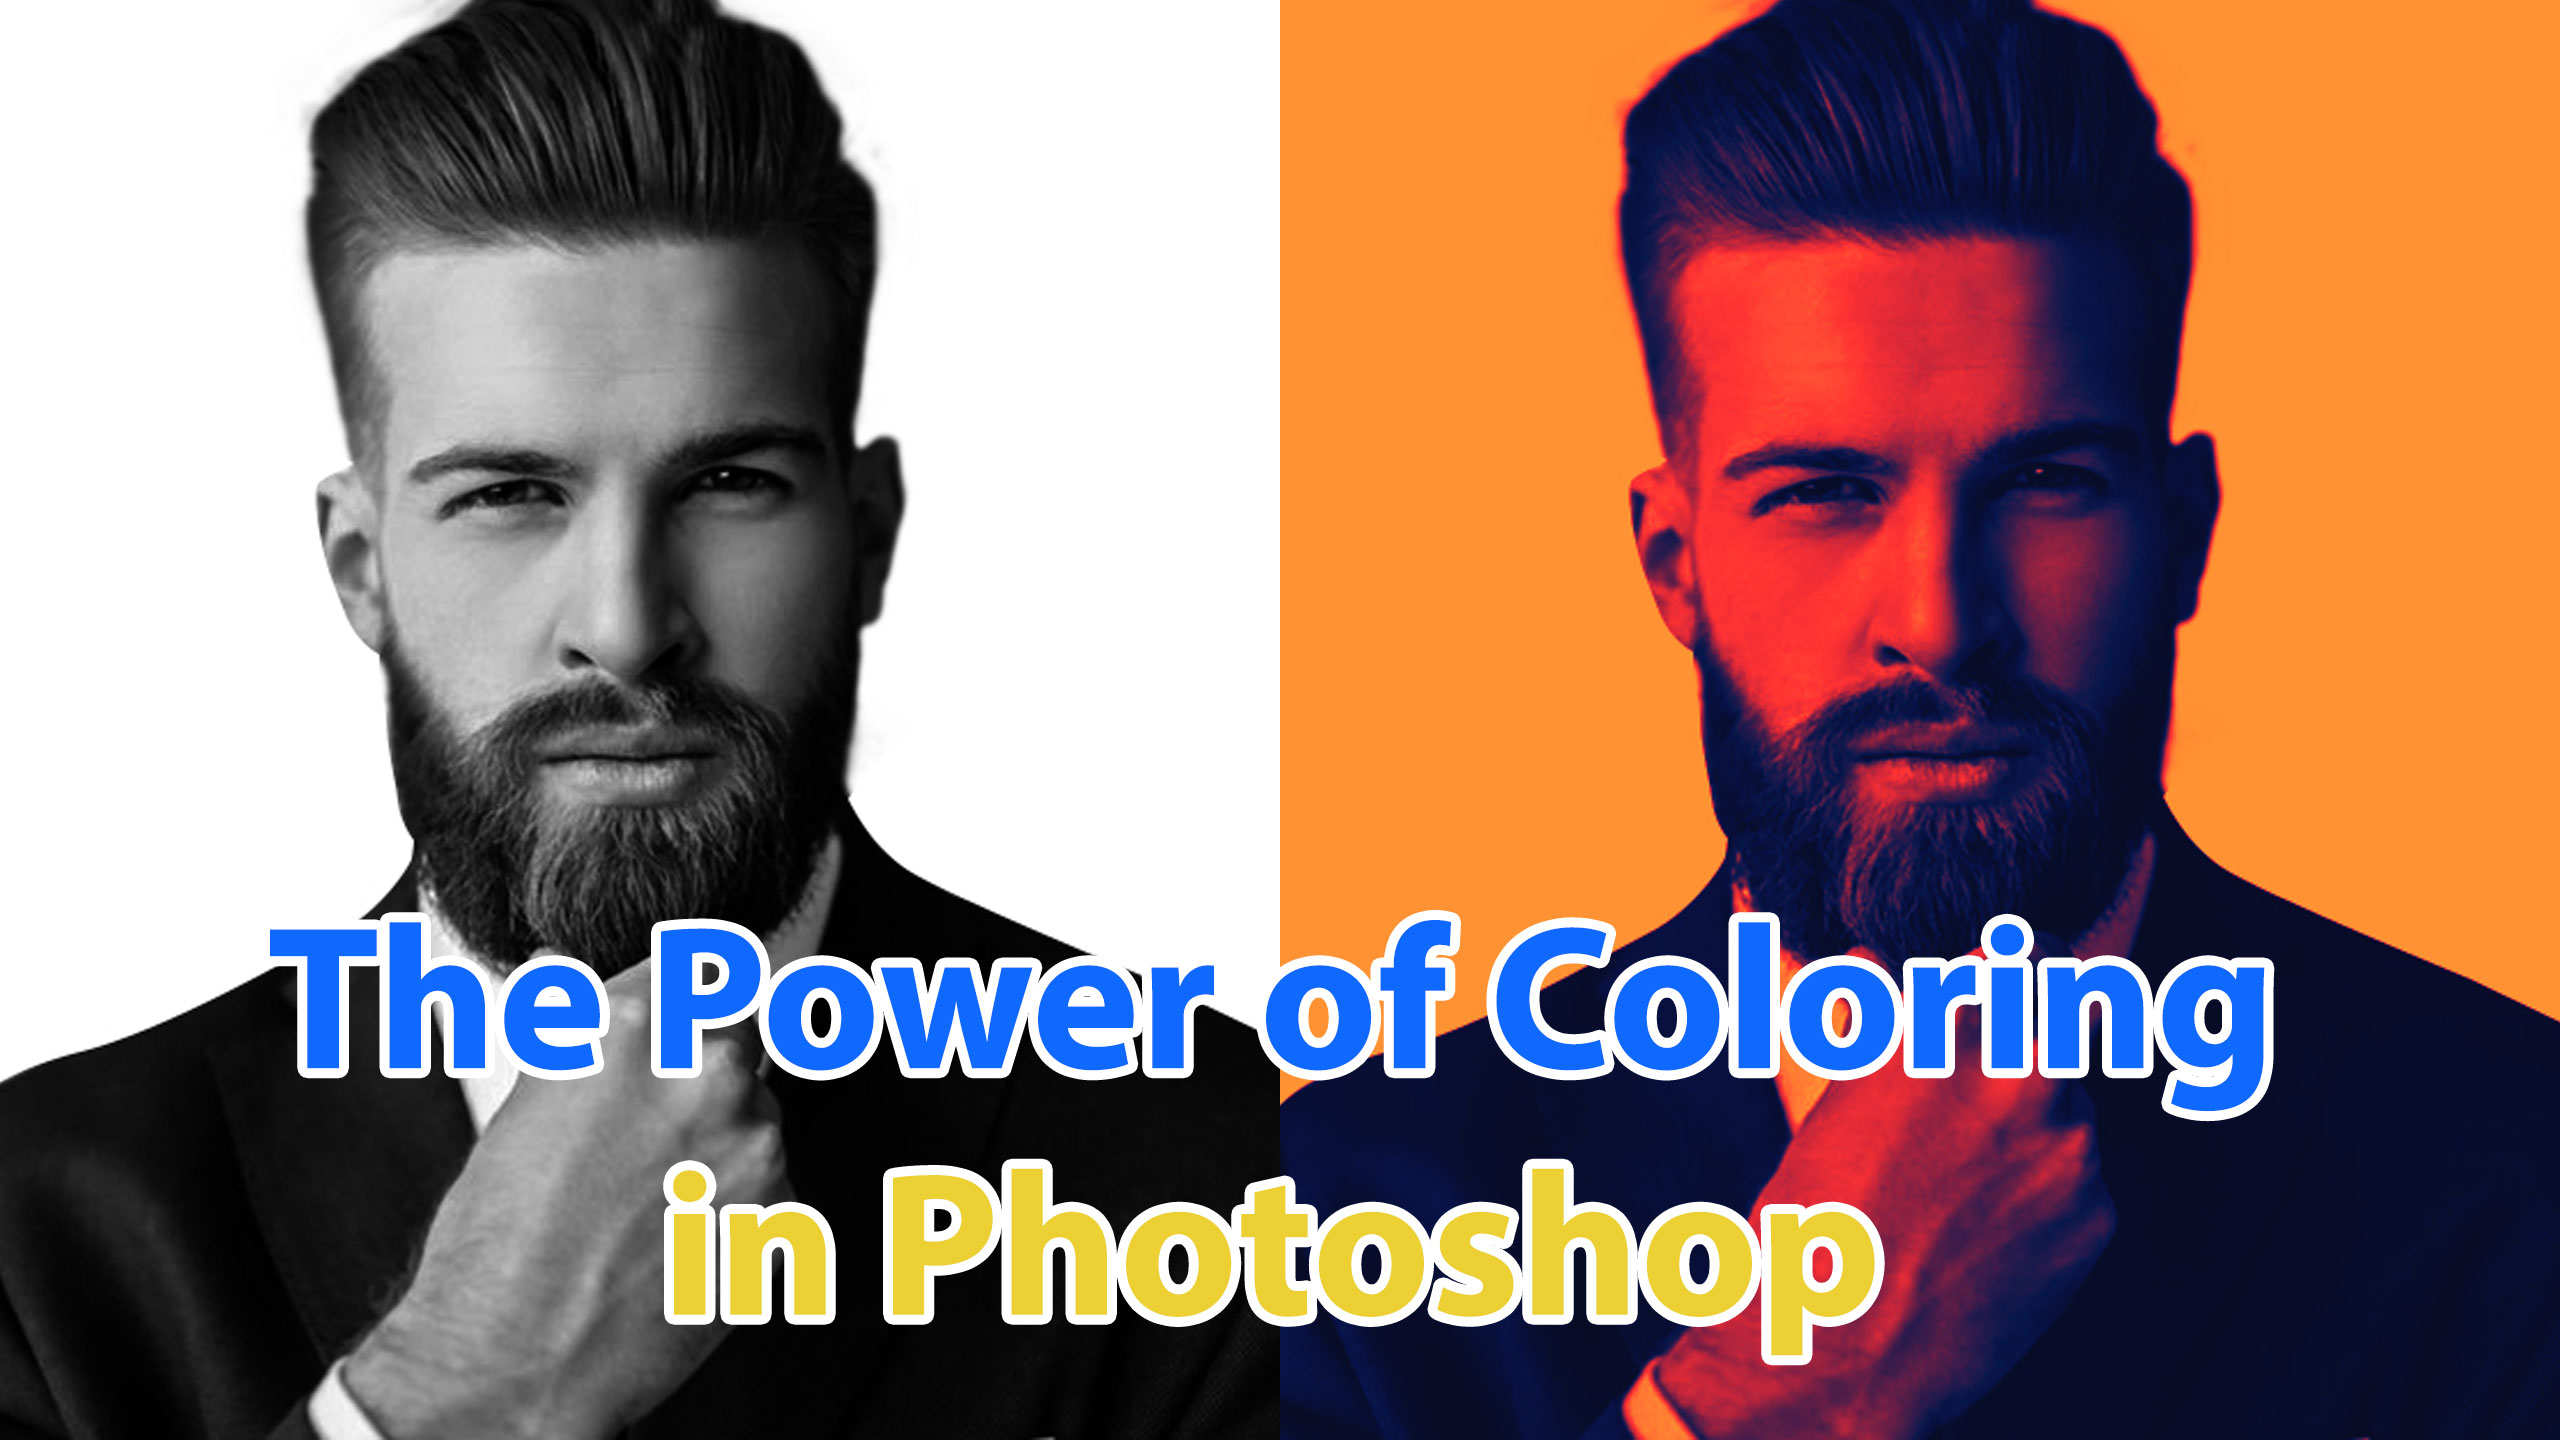 The Power of Coloring in Photoshop